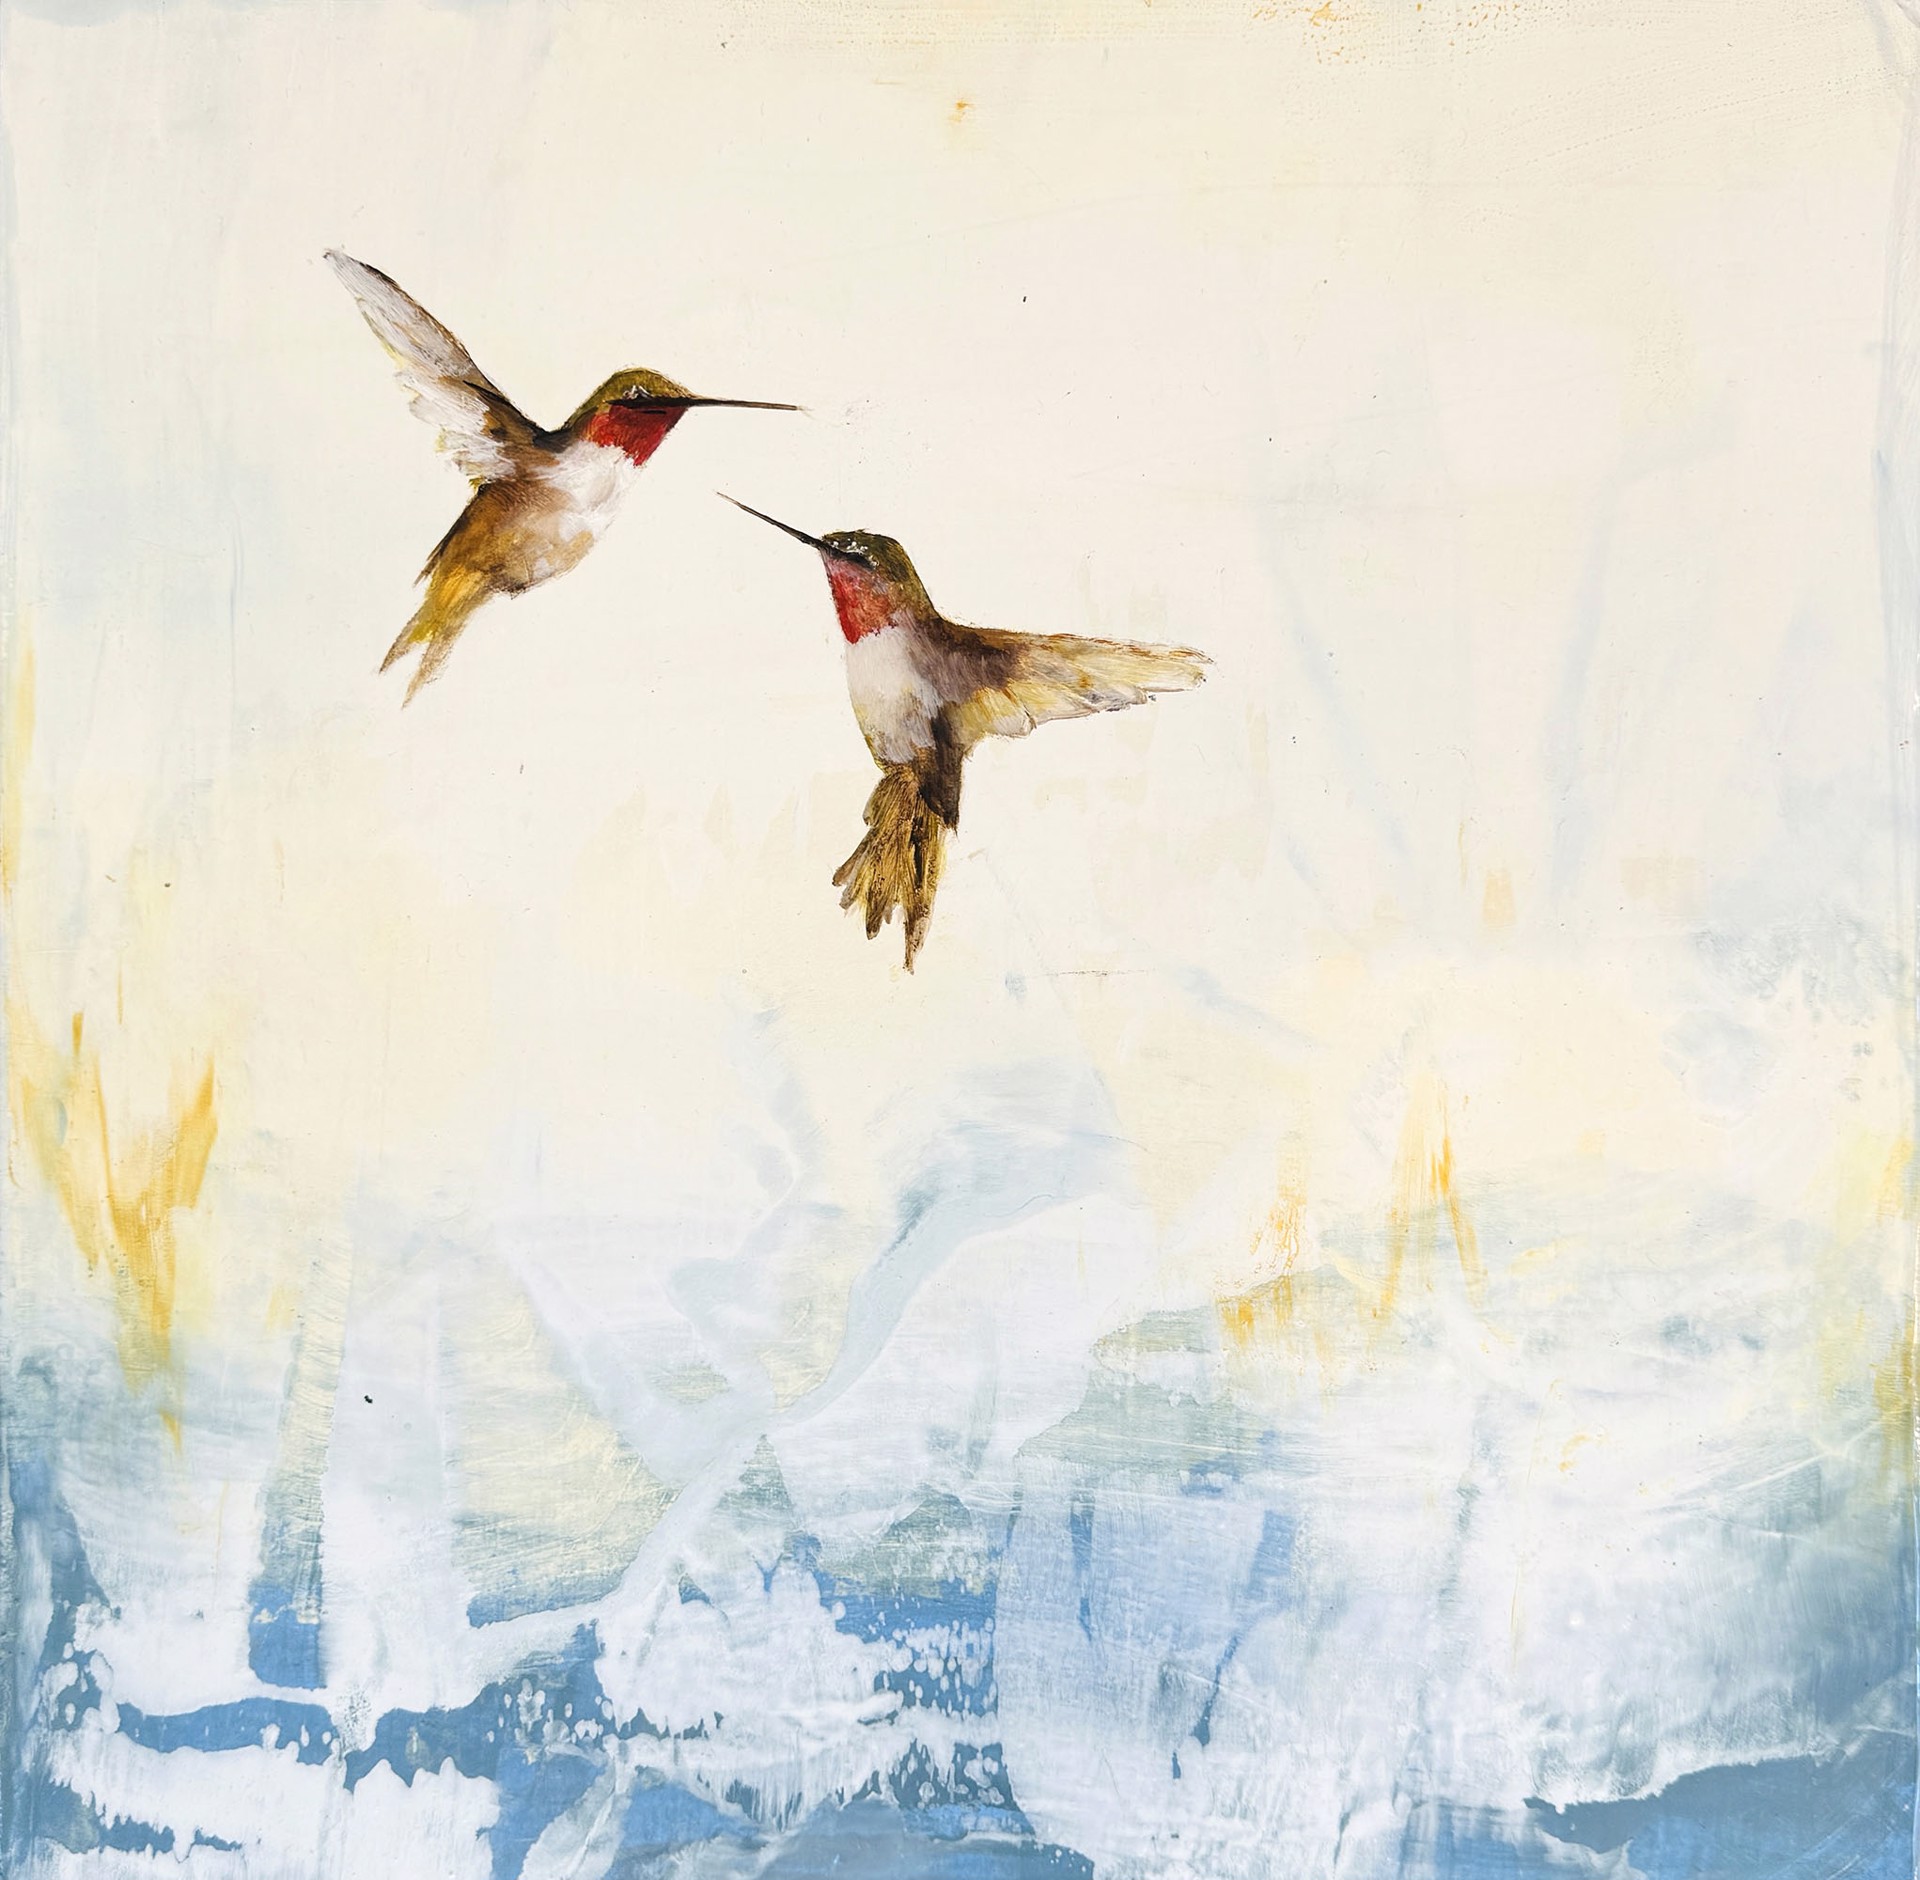 Original Oil Painting By Jenna Von Benedikt Featuring Two Hummingbirds On Abstract Blue Background